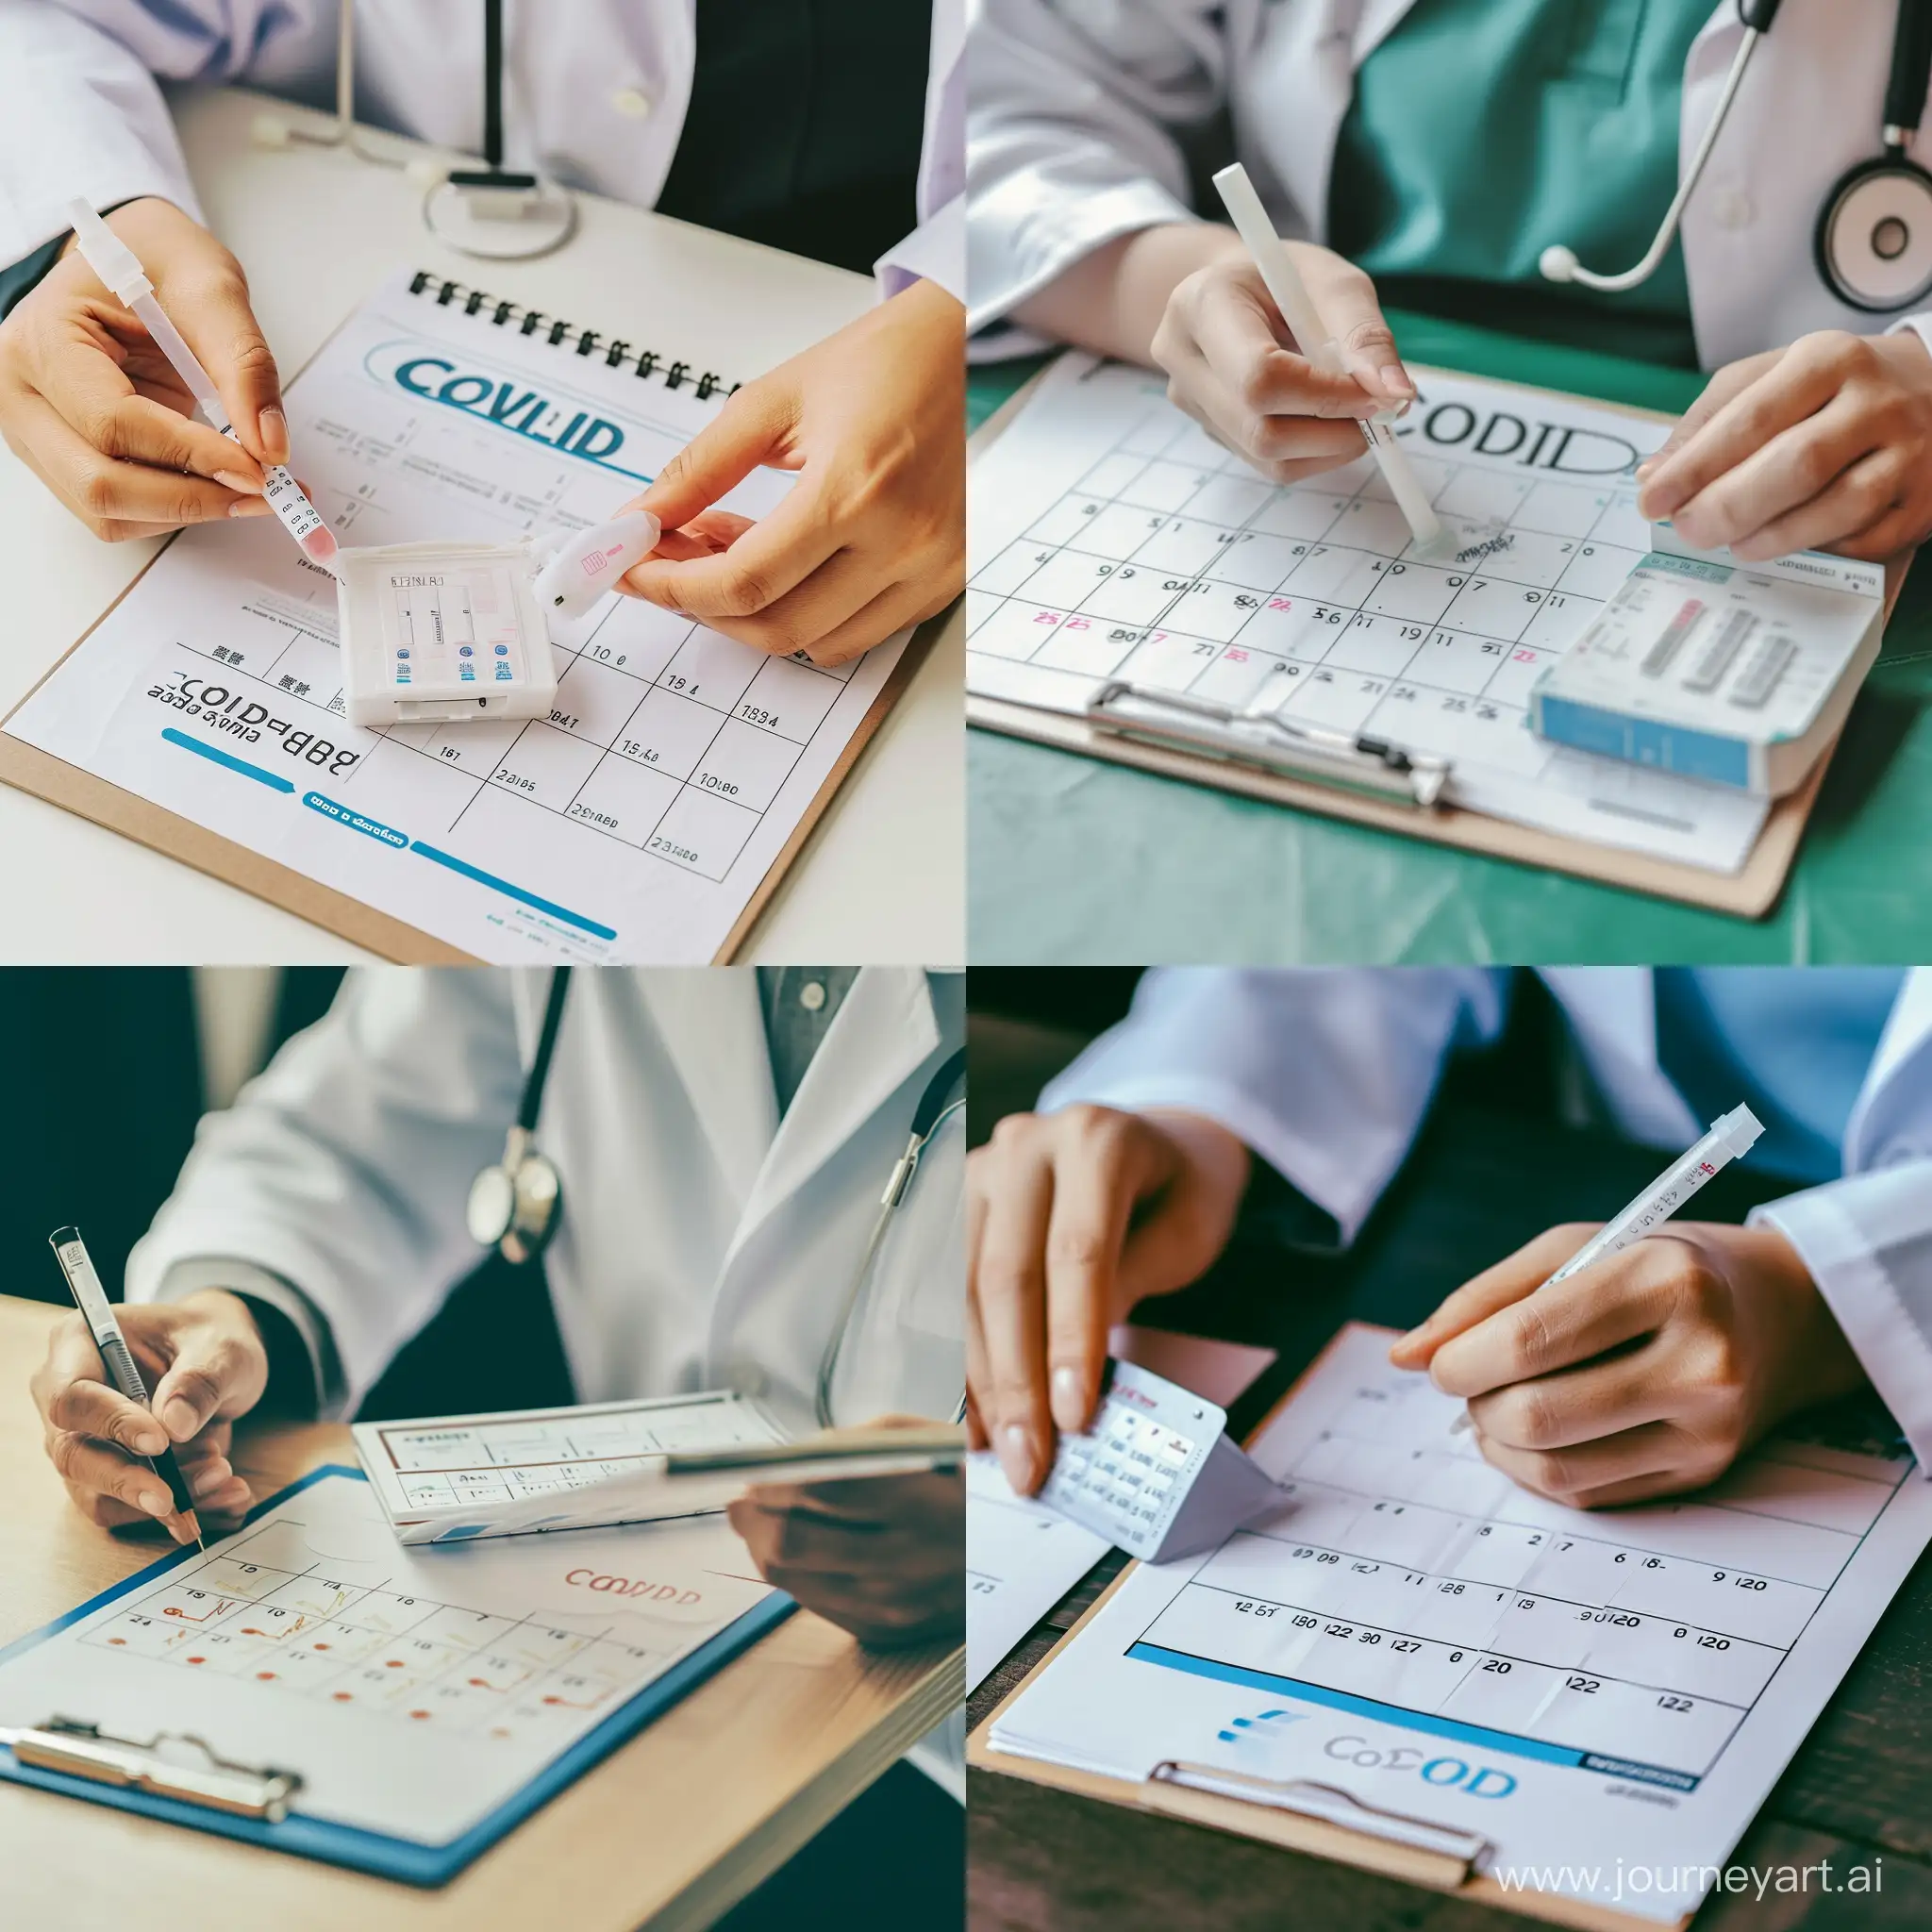 A stock photo of a healthcare professional examining a calendar and a COVID test kit, symbolizing the importance of checking expiration dates. Primary color #2596be, friendly and professional mood, centered composition. Created Using: Professional photography, clear and readable font, high-contrast imagery, engaging and friendly visual approach, HD quality, natural look